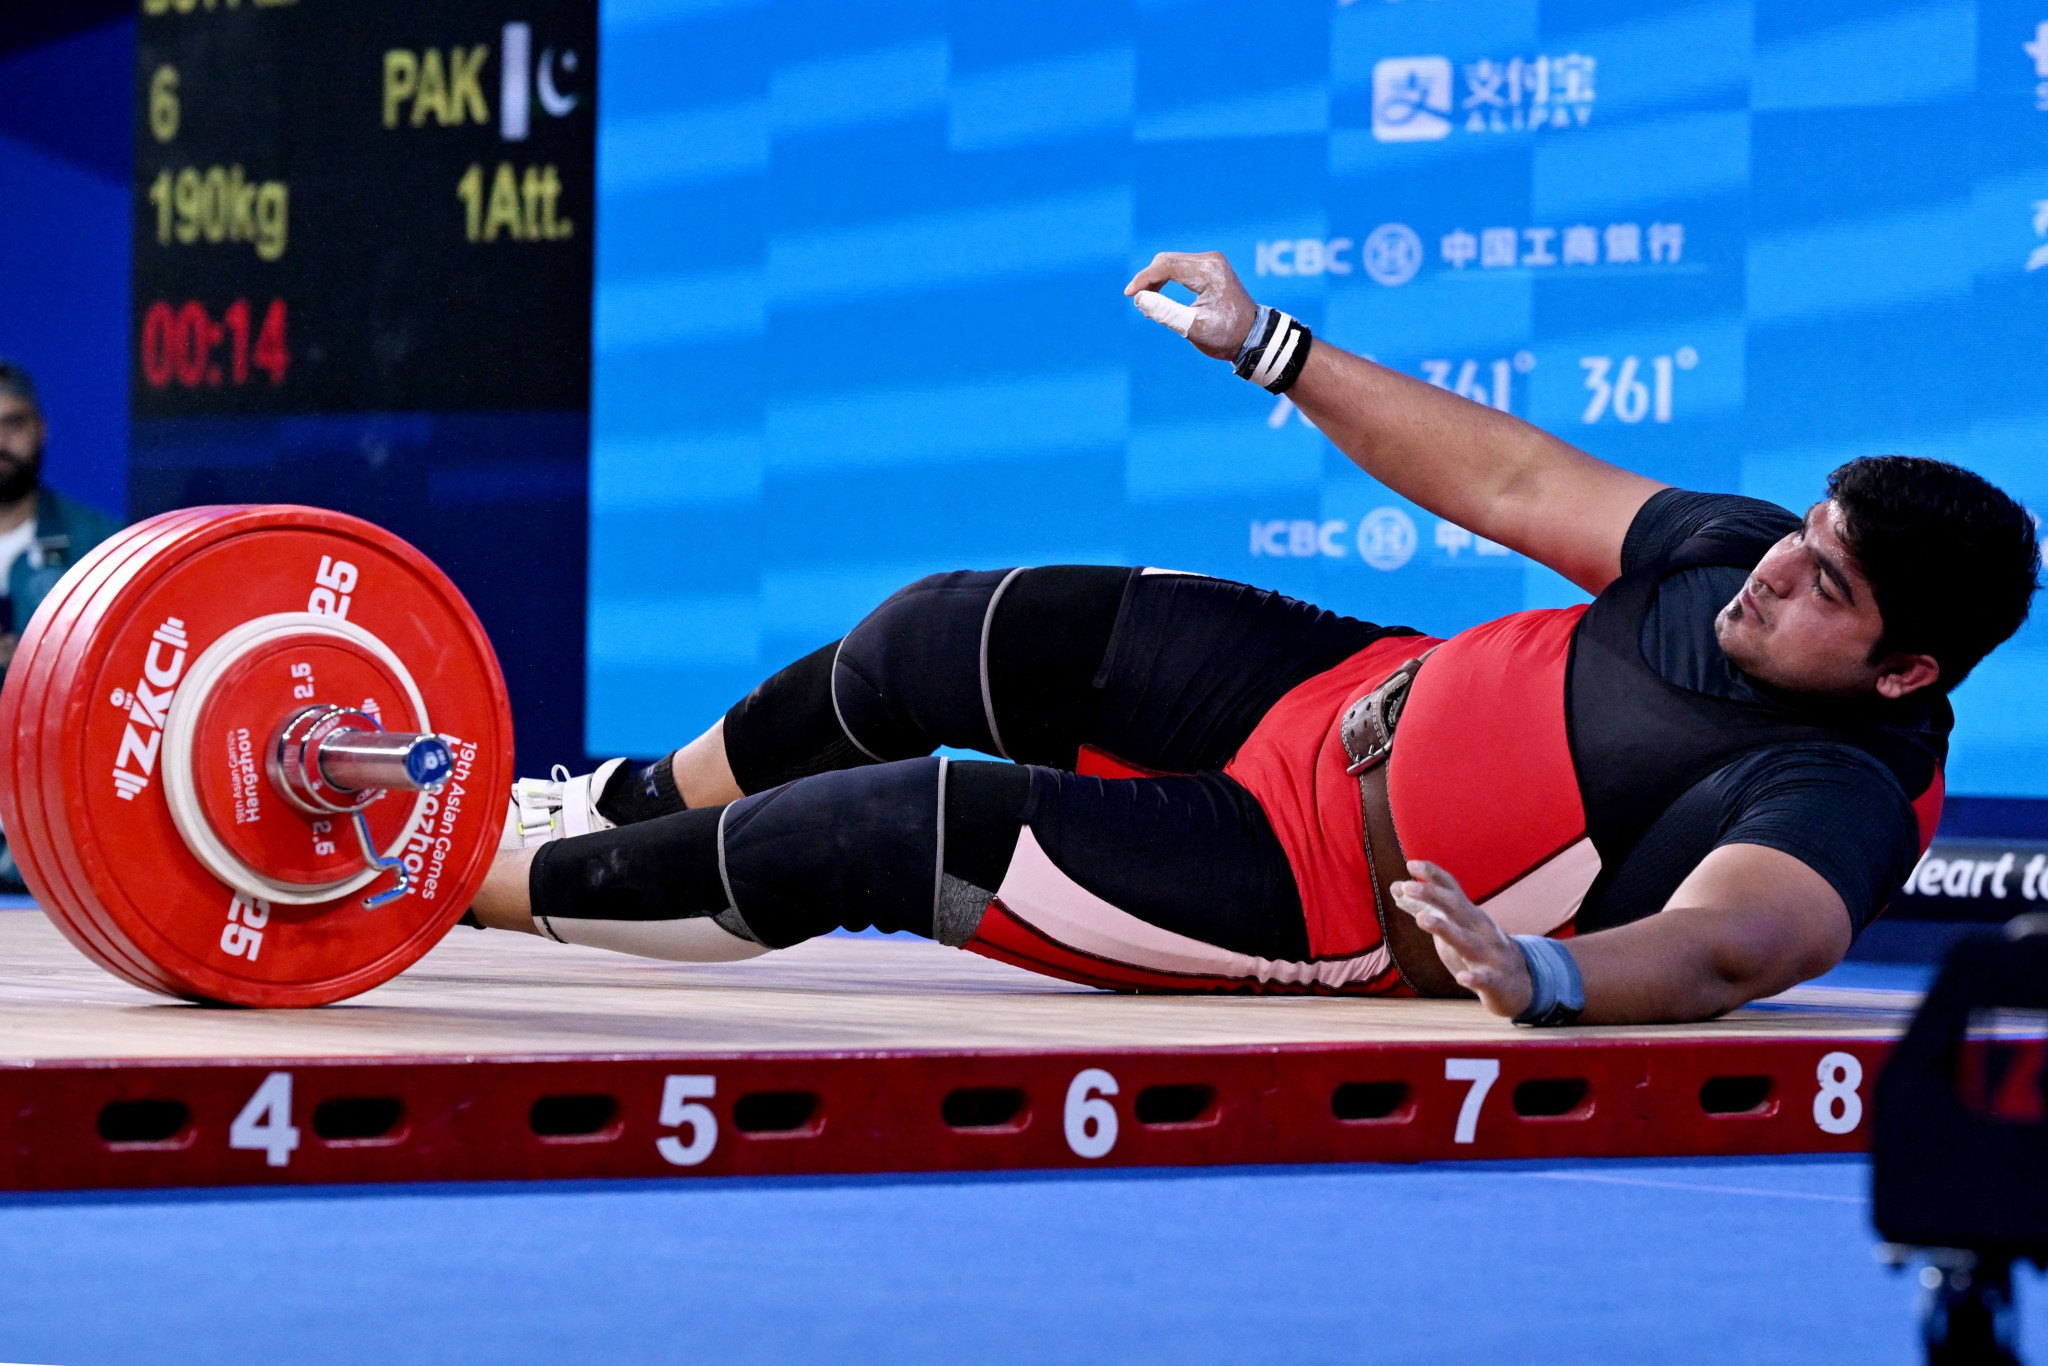 Pakistan's Muhammad Butt falls during the men's over-109kg weightlifting final ©Getty Images